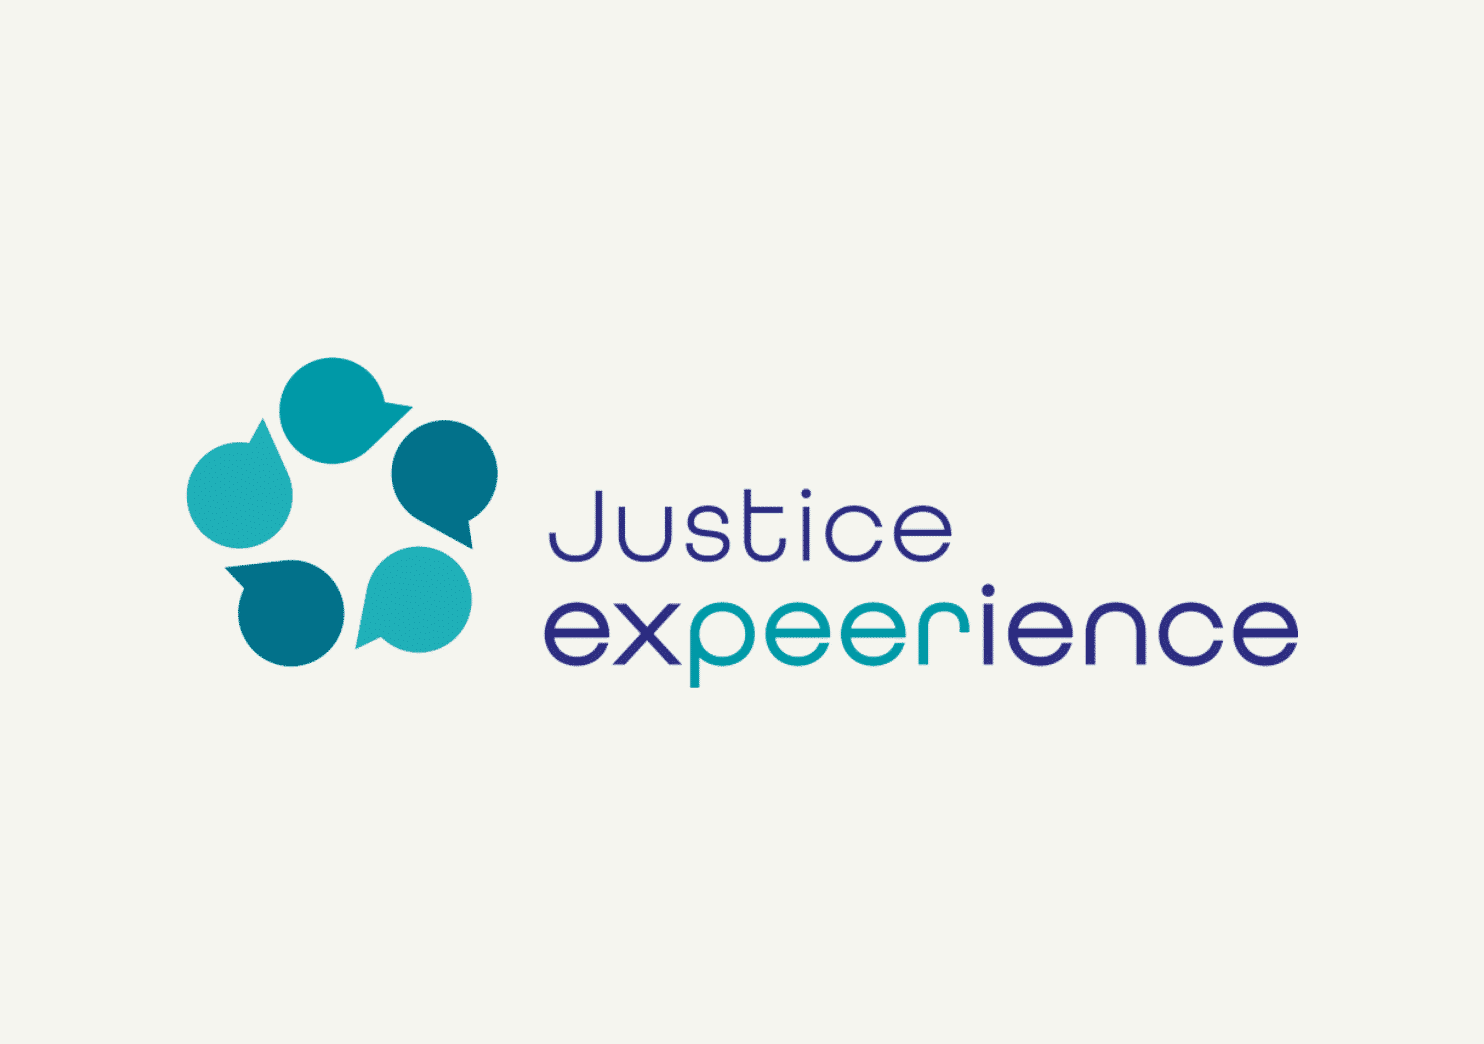 Justice ExPEERience: a network and a platform for the promotion of human rights